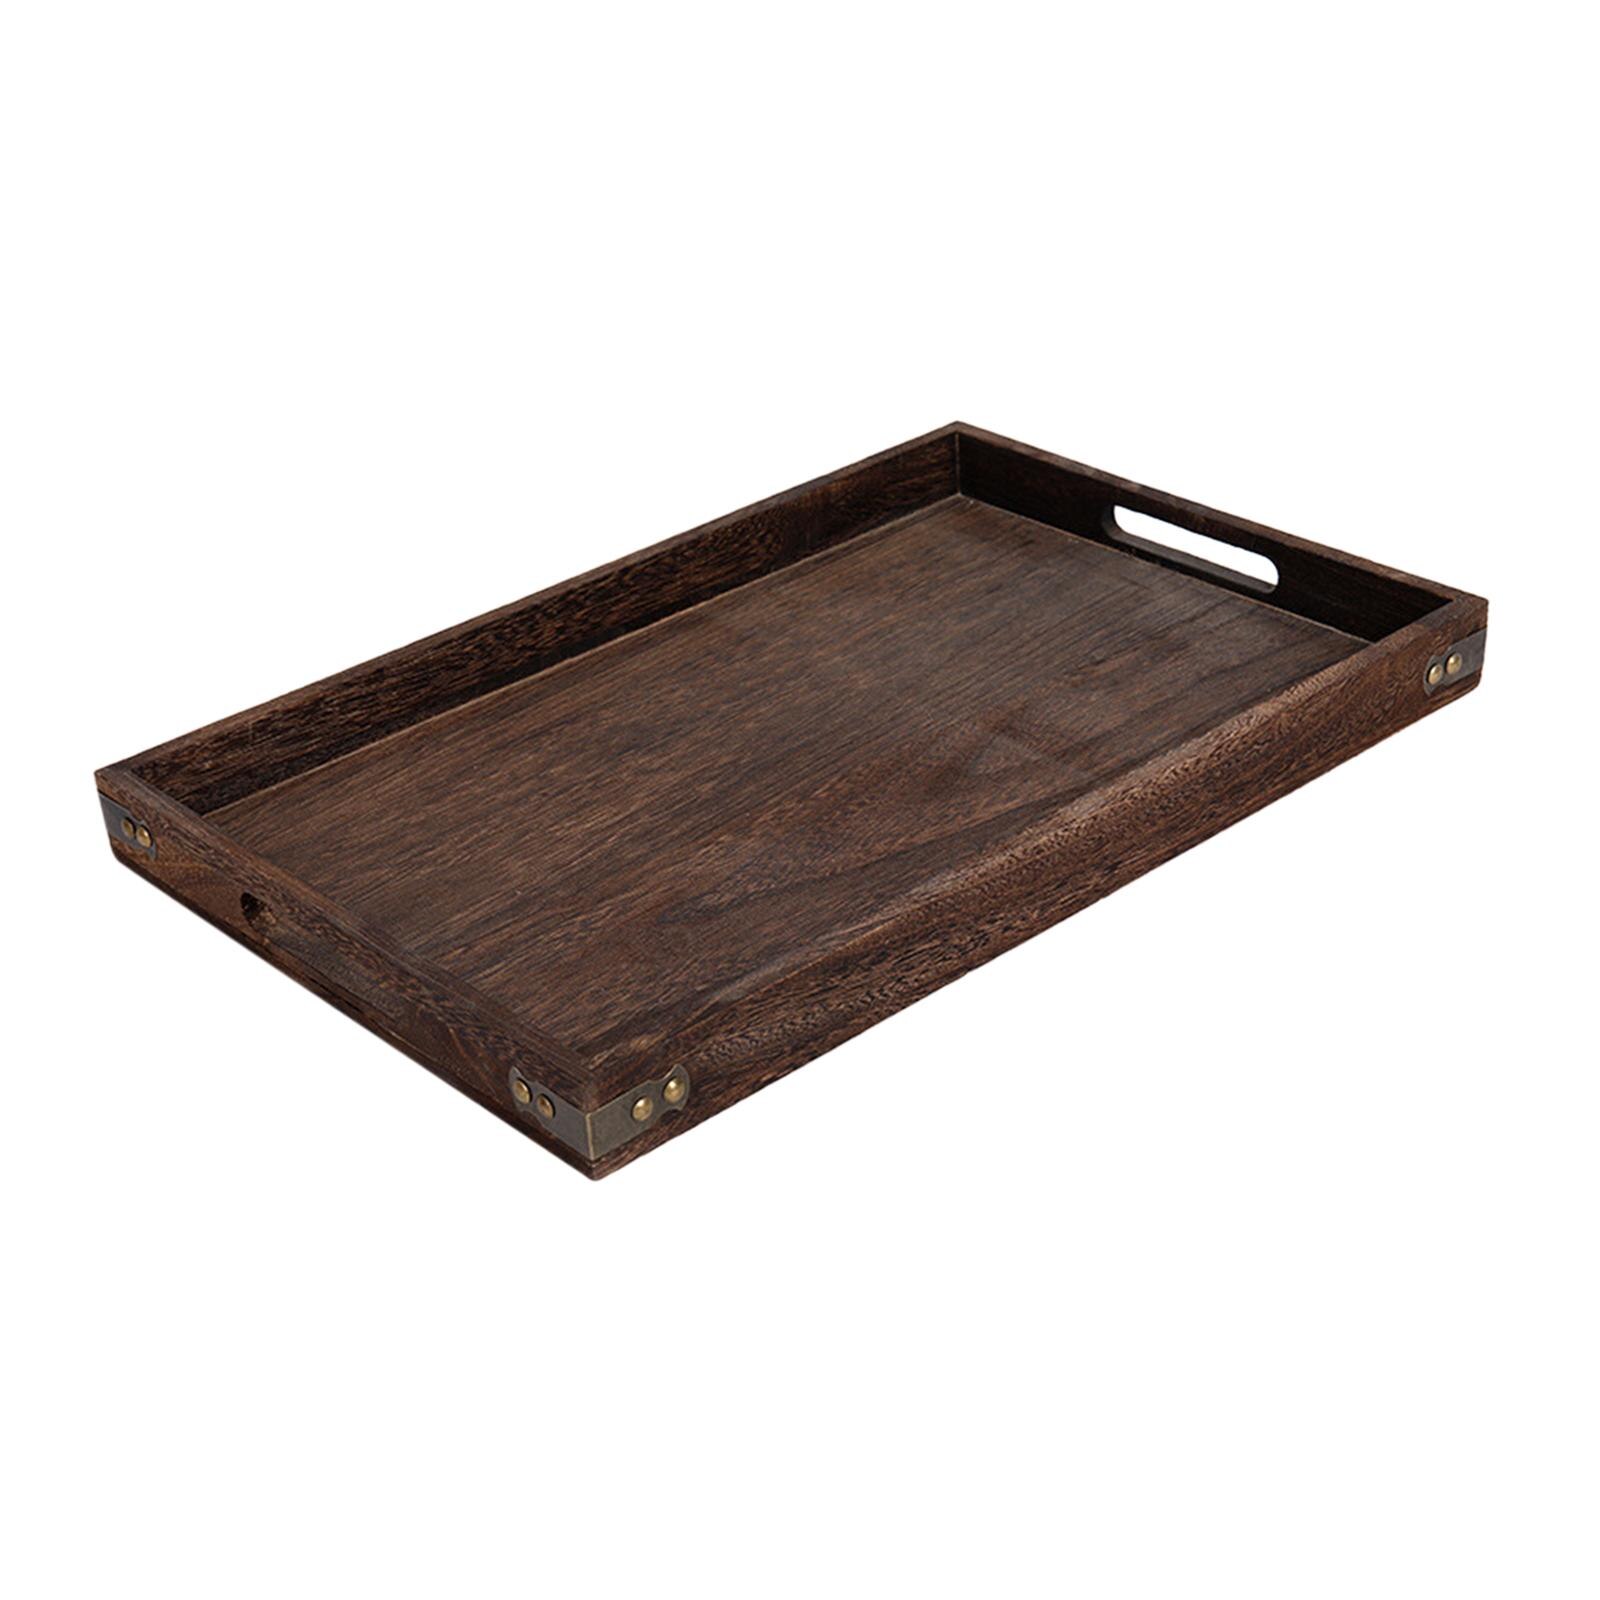 Multipurpose Wooden Serving Tray Accessory Convenient to Use Simple to Clean and Maintain Dessert Tray Tea Cup Tray Space Saving